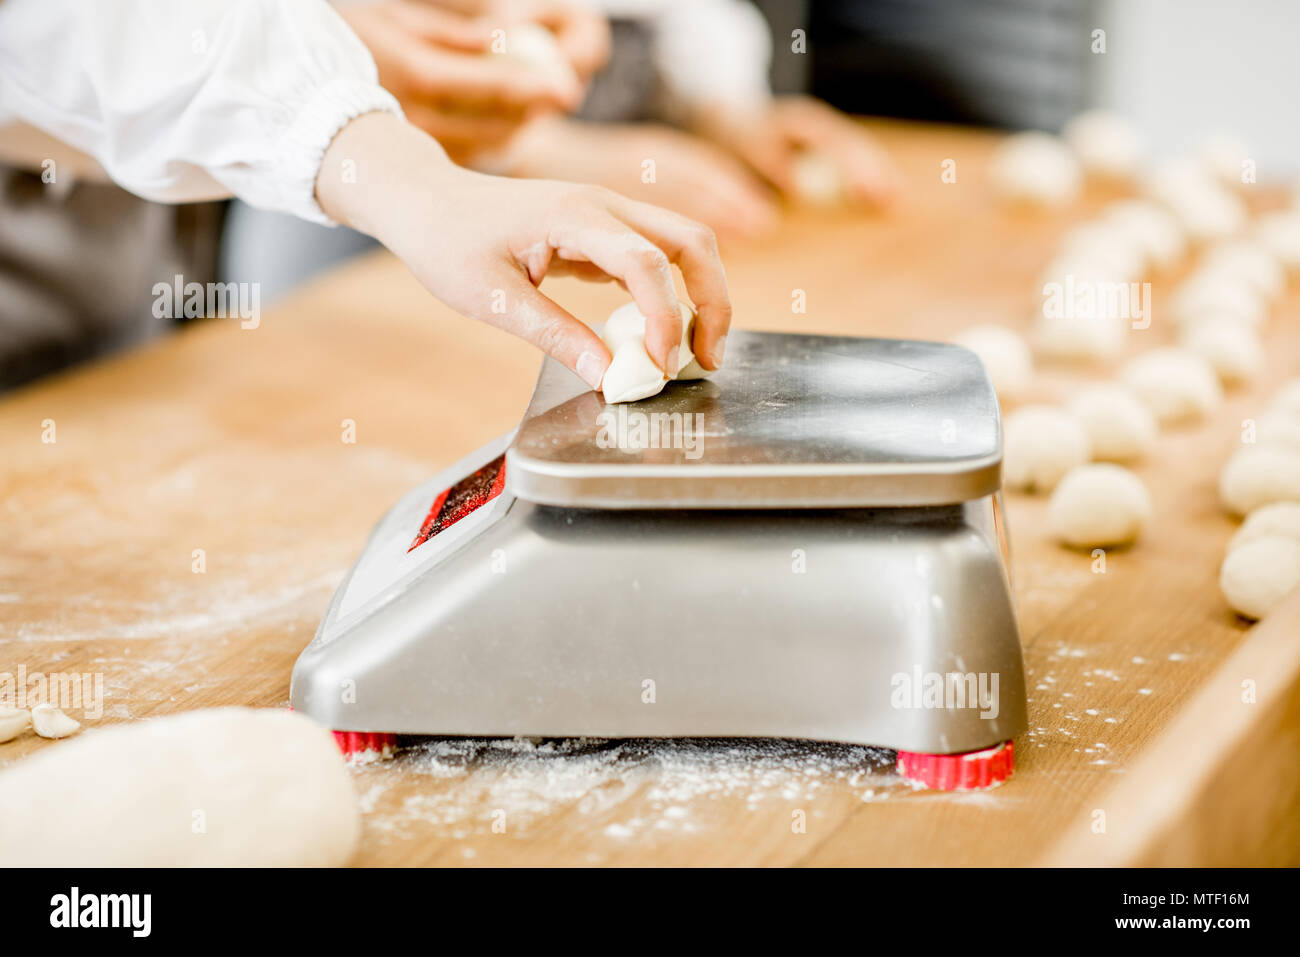 https://c8.alamy.com/comp/MTF16M/baker-weighing-dough-portions-for-baking-buns-at-the-manufacturig-close-up-view-MTF16M.jpg